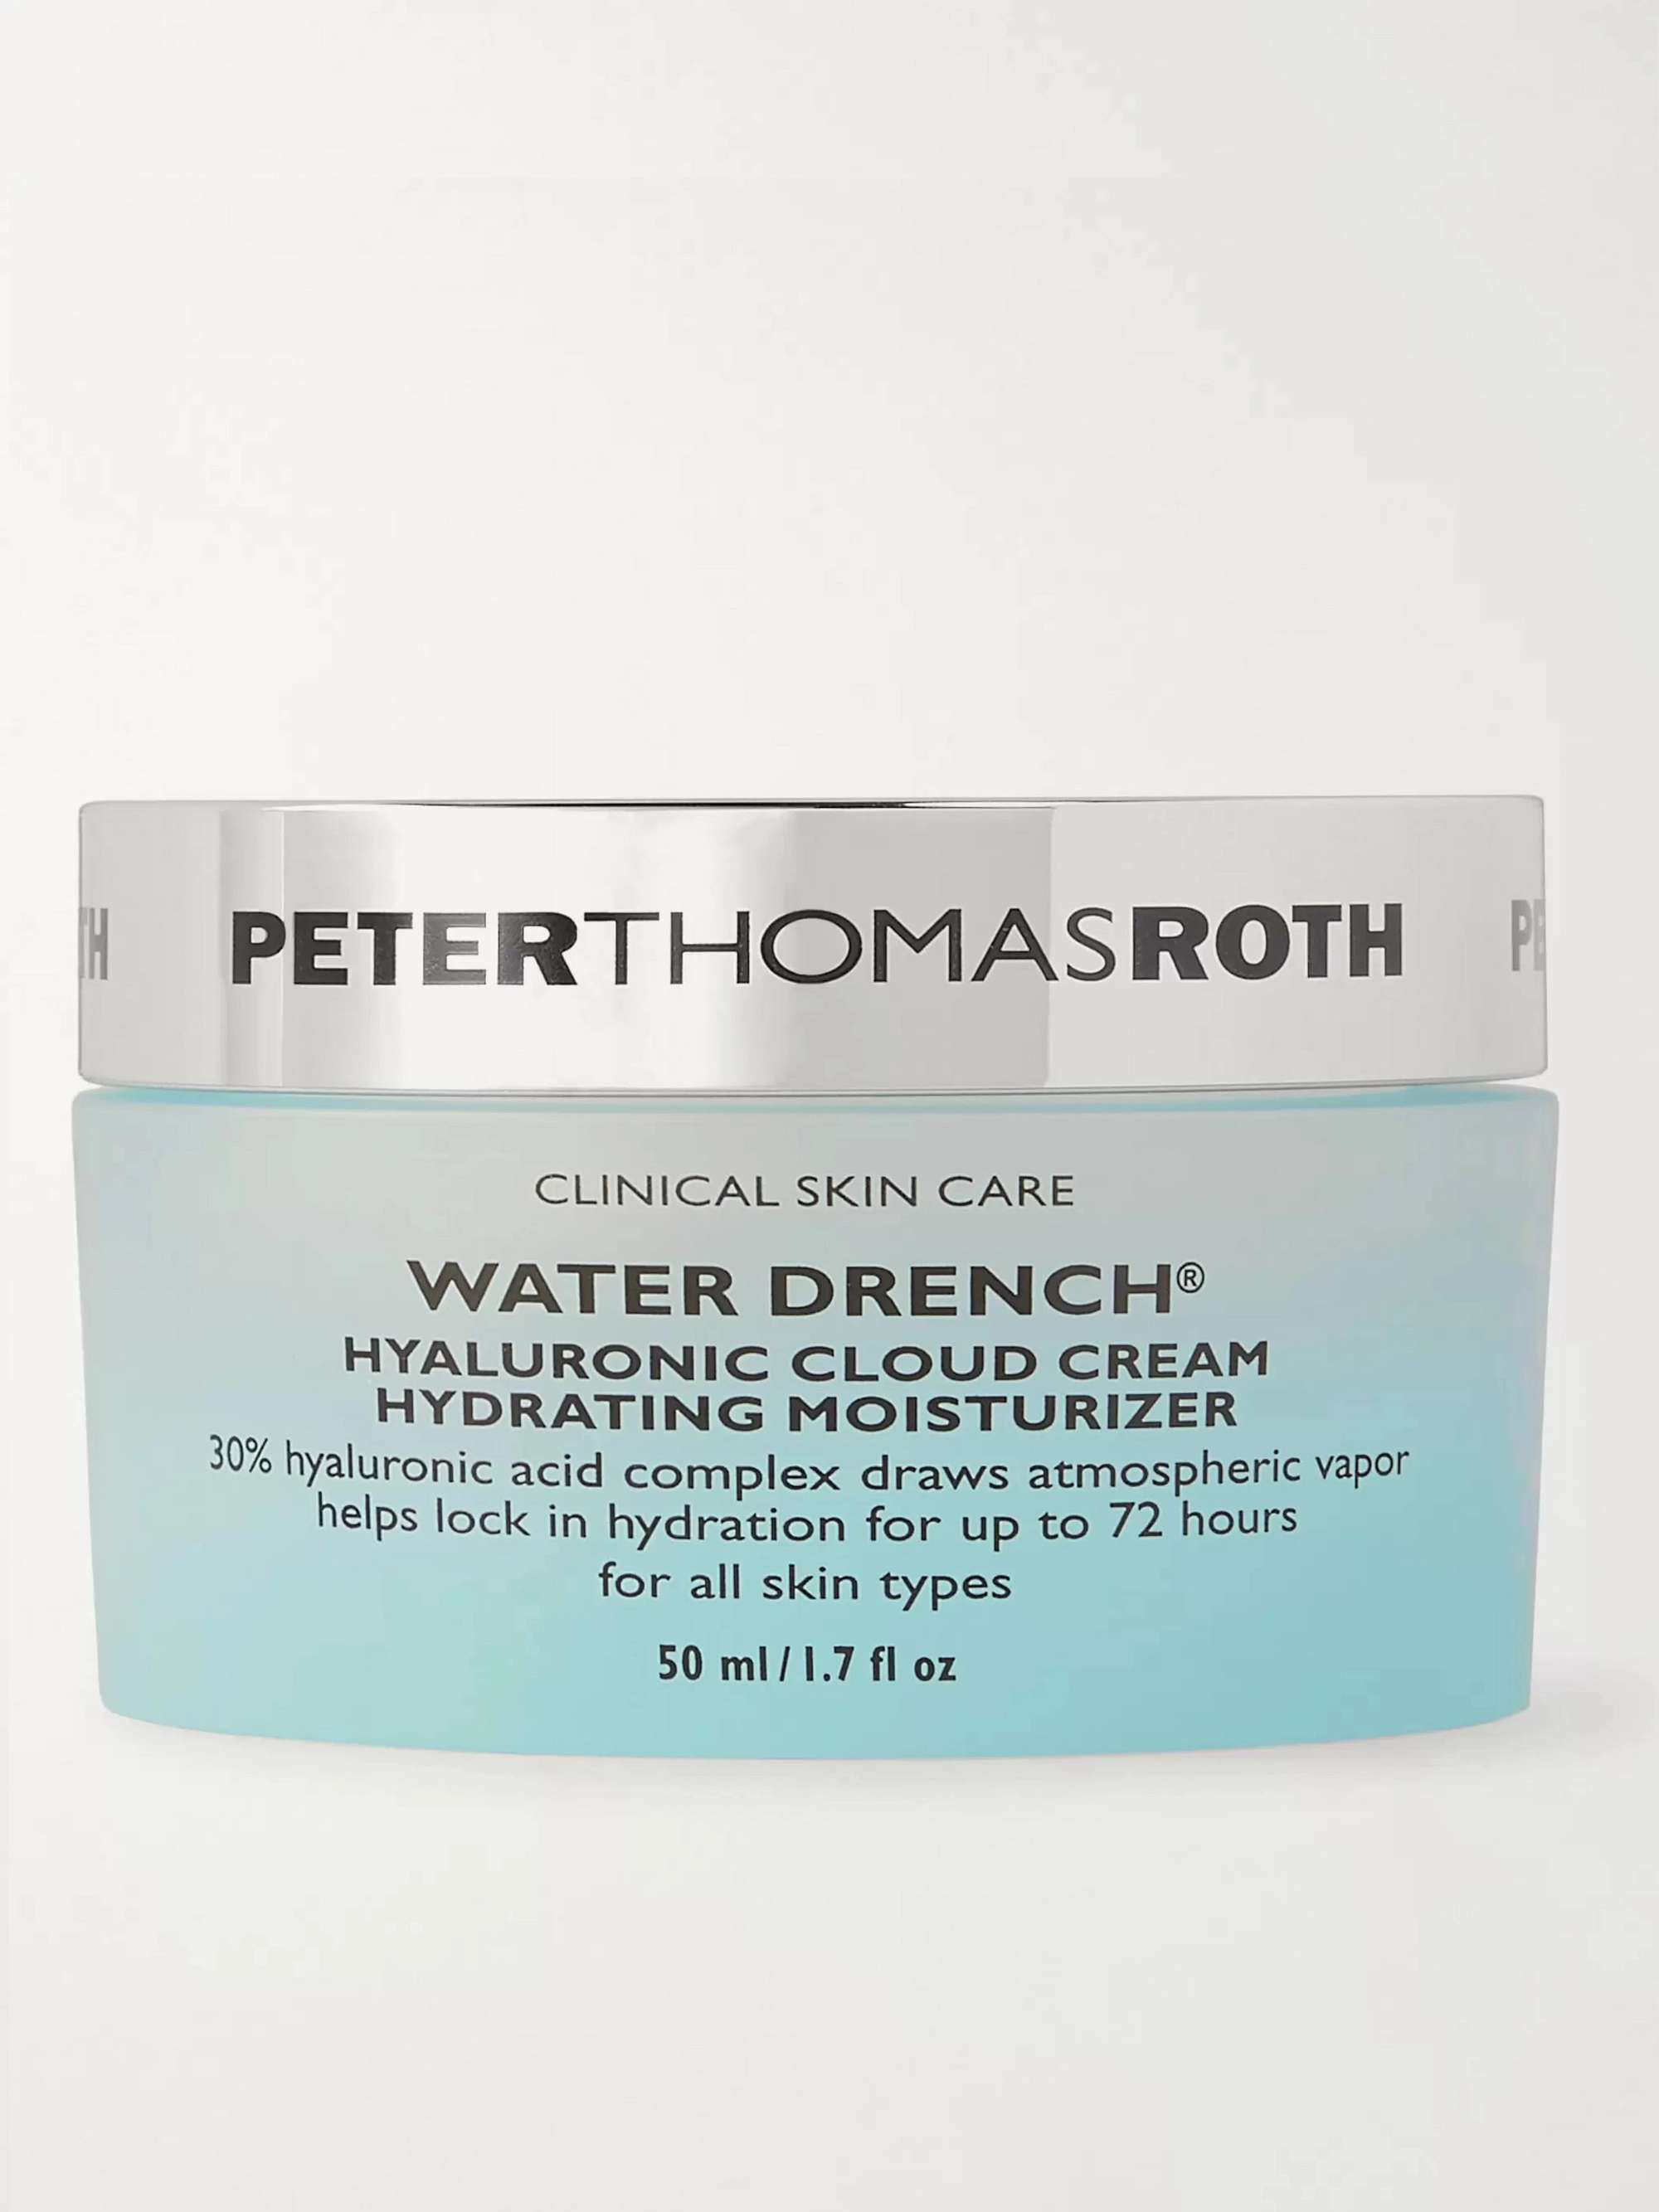 PETER THOMAS ROTH Water Drench Hyaluronic Cloud Cream Hydrating Moisturizer, 50ml